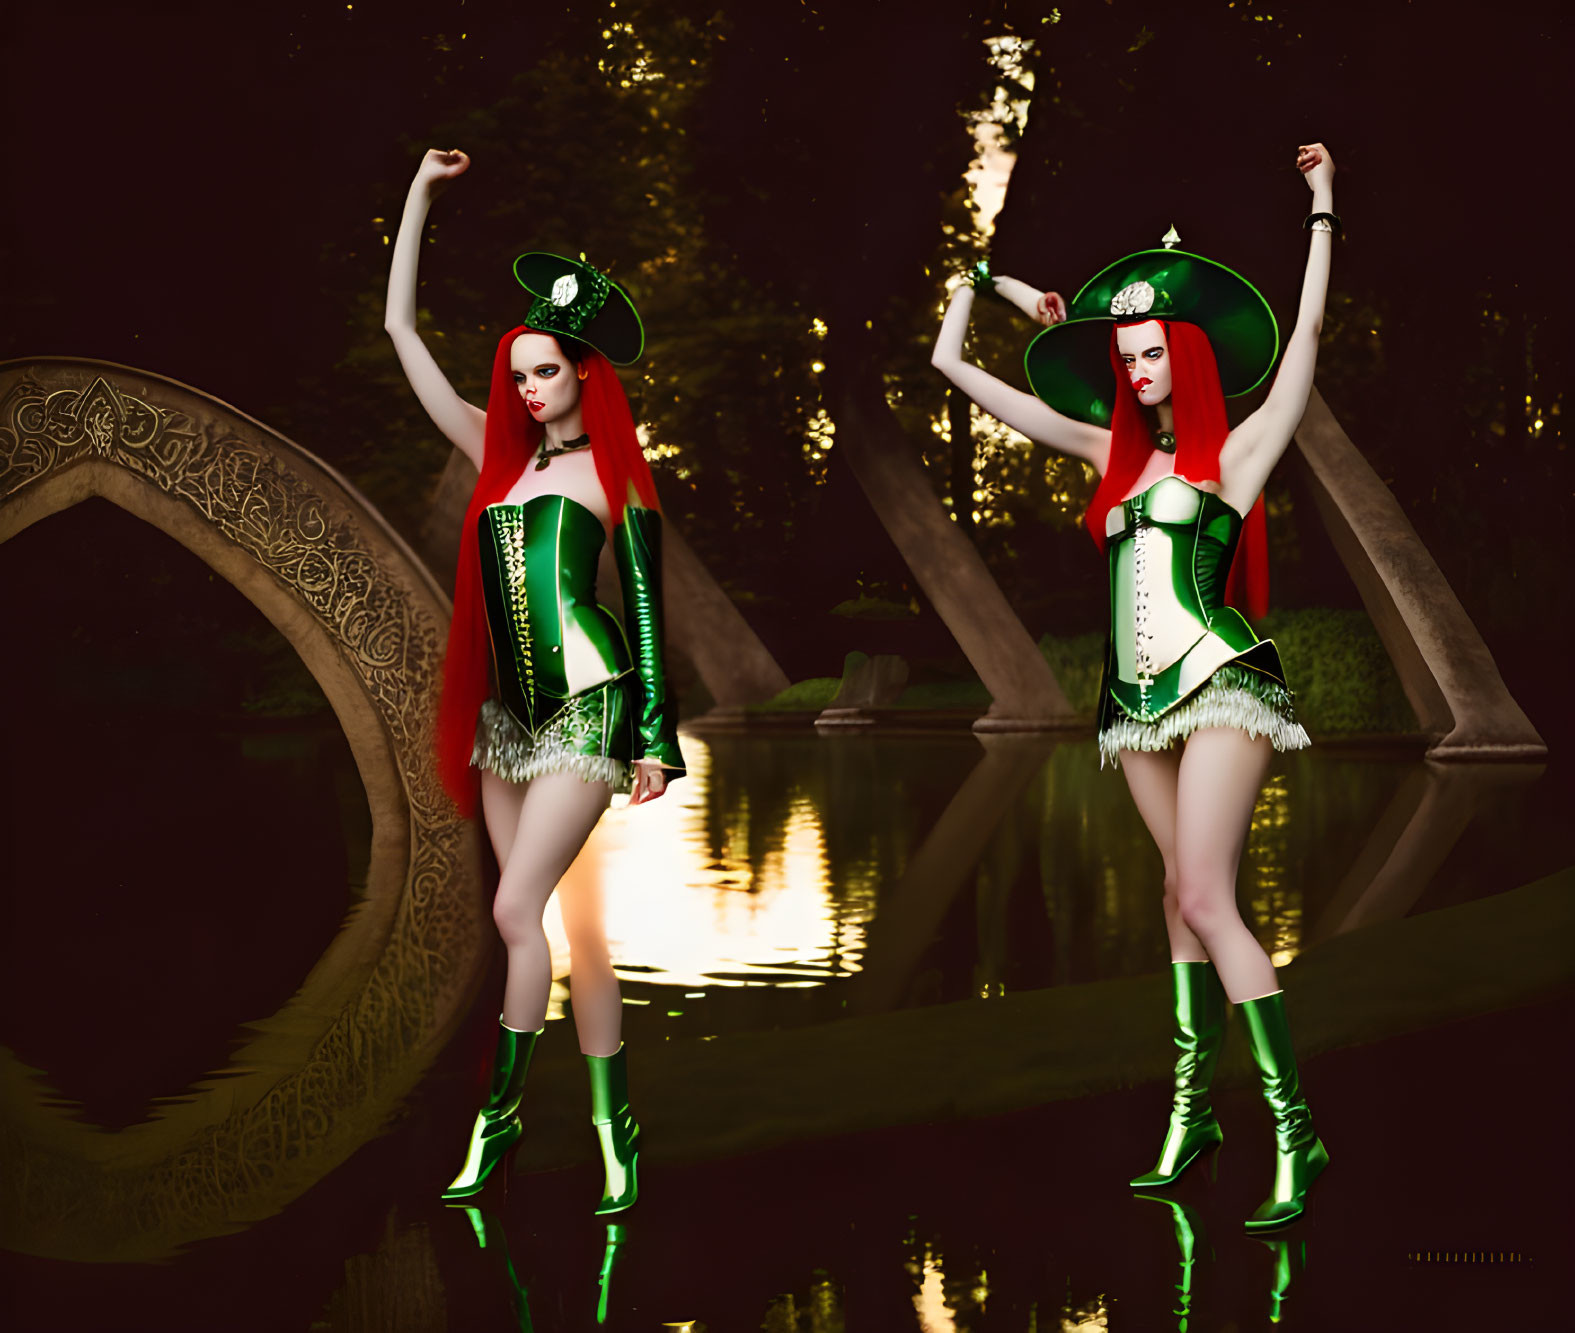 Two Matching Green and Red Pirate Costumes by Nighttime Pond